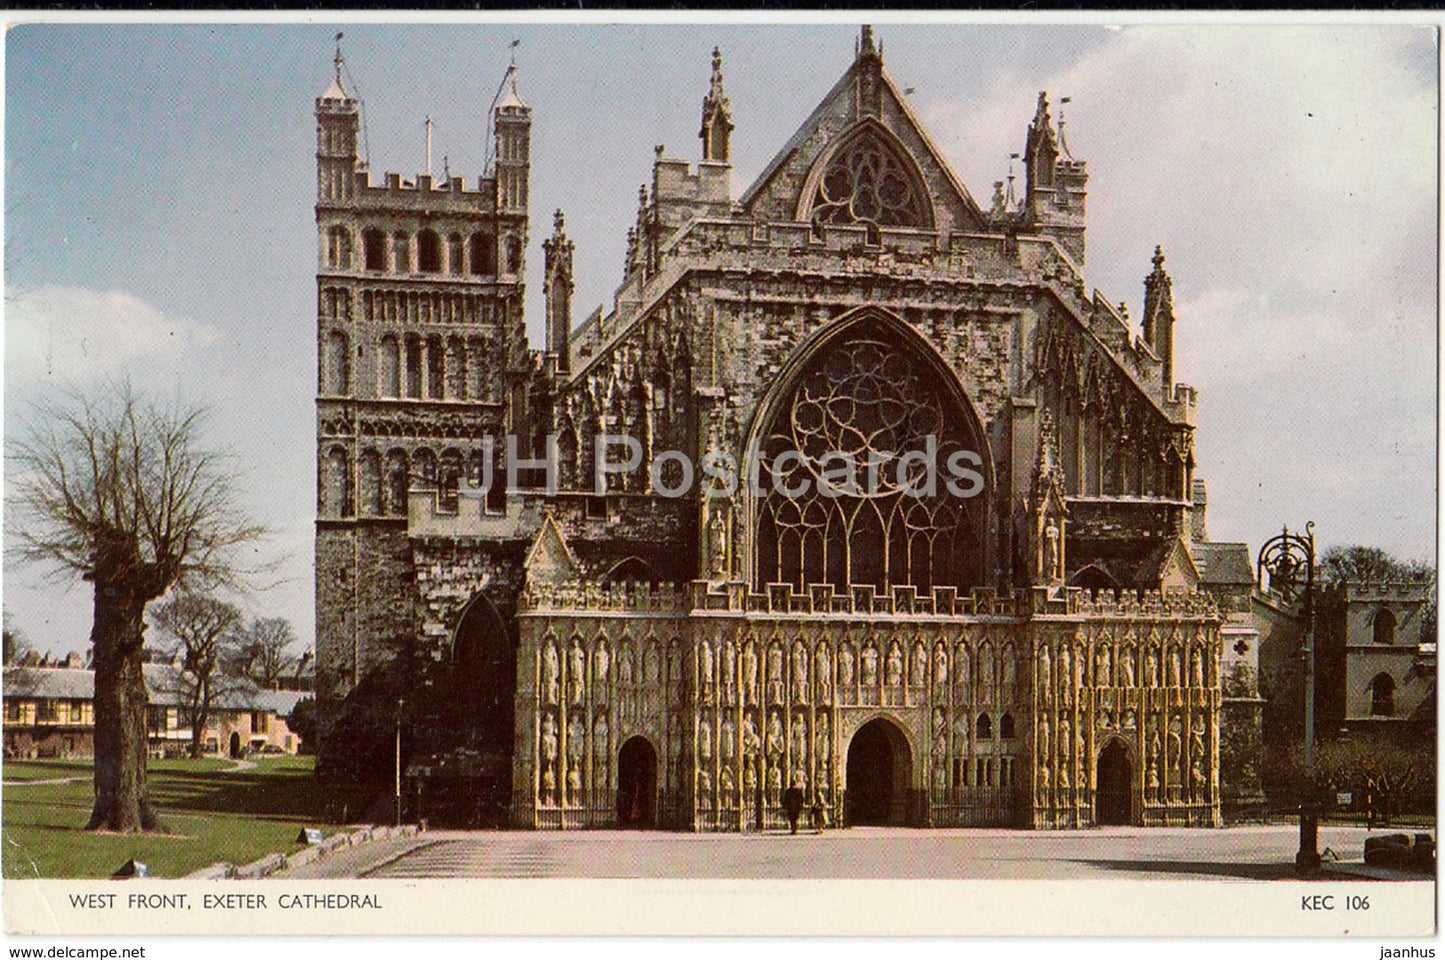 Exeter Cathedral - West Front - KEC 106 - 1969 - United Kingdom - England - used - JH Postcards